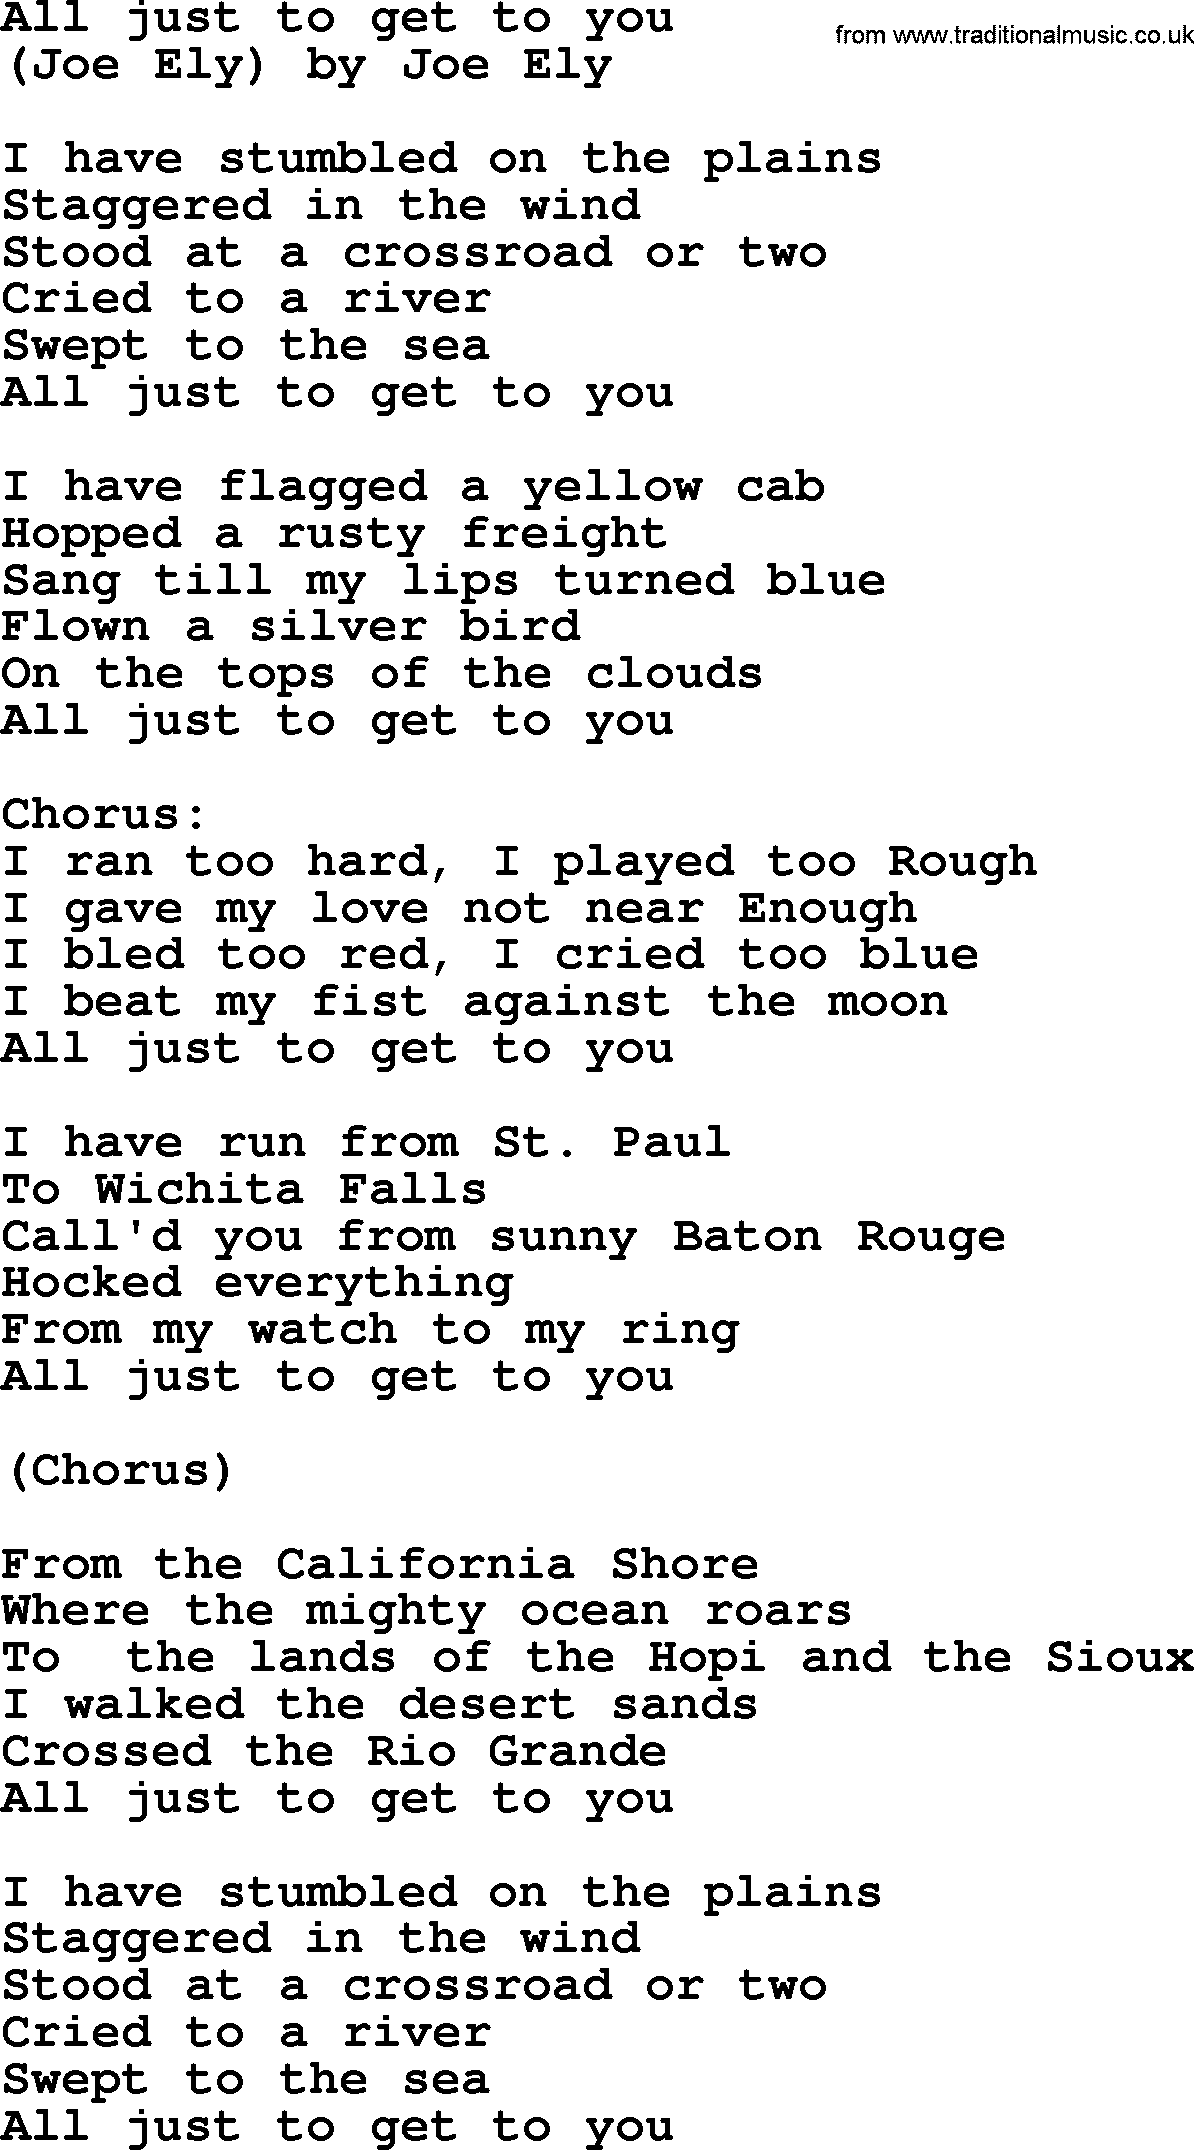 Bruce Springsteen song: All Just To Get To You lyrics